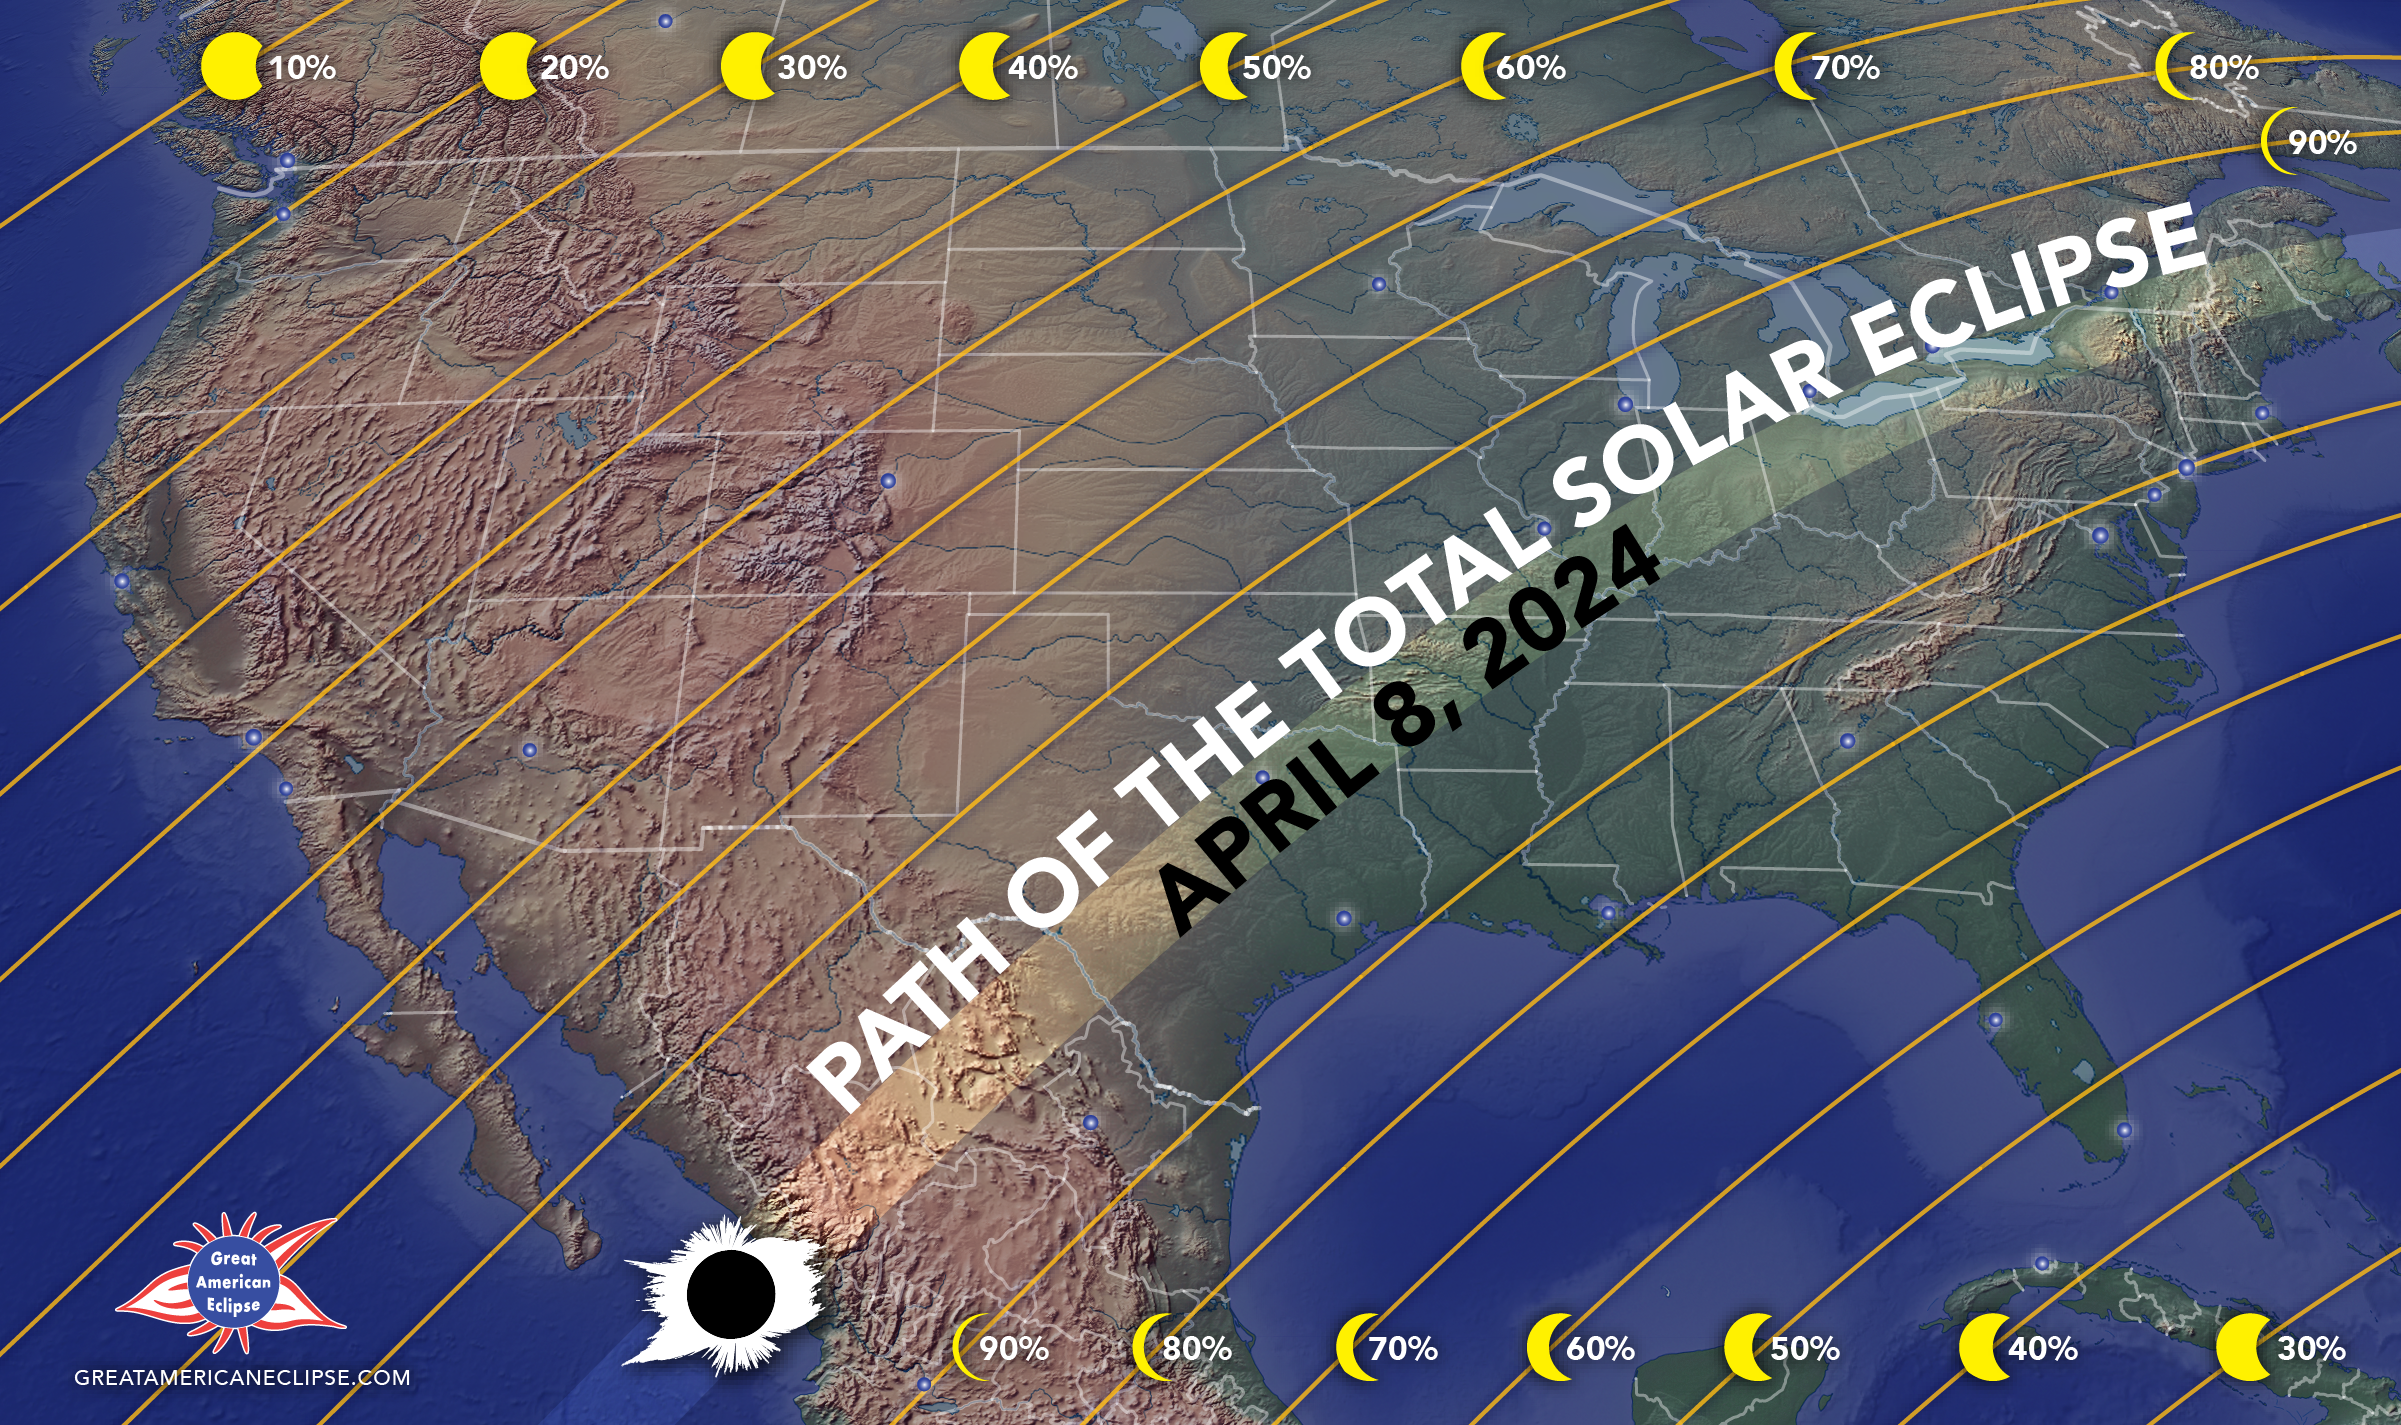 This graphic shows the path of the solar eclipse over the United States.